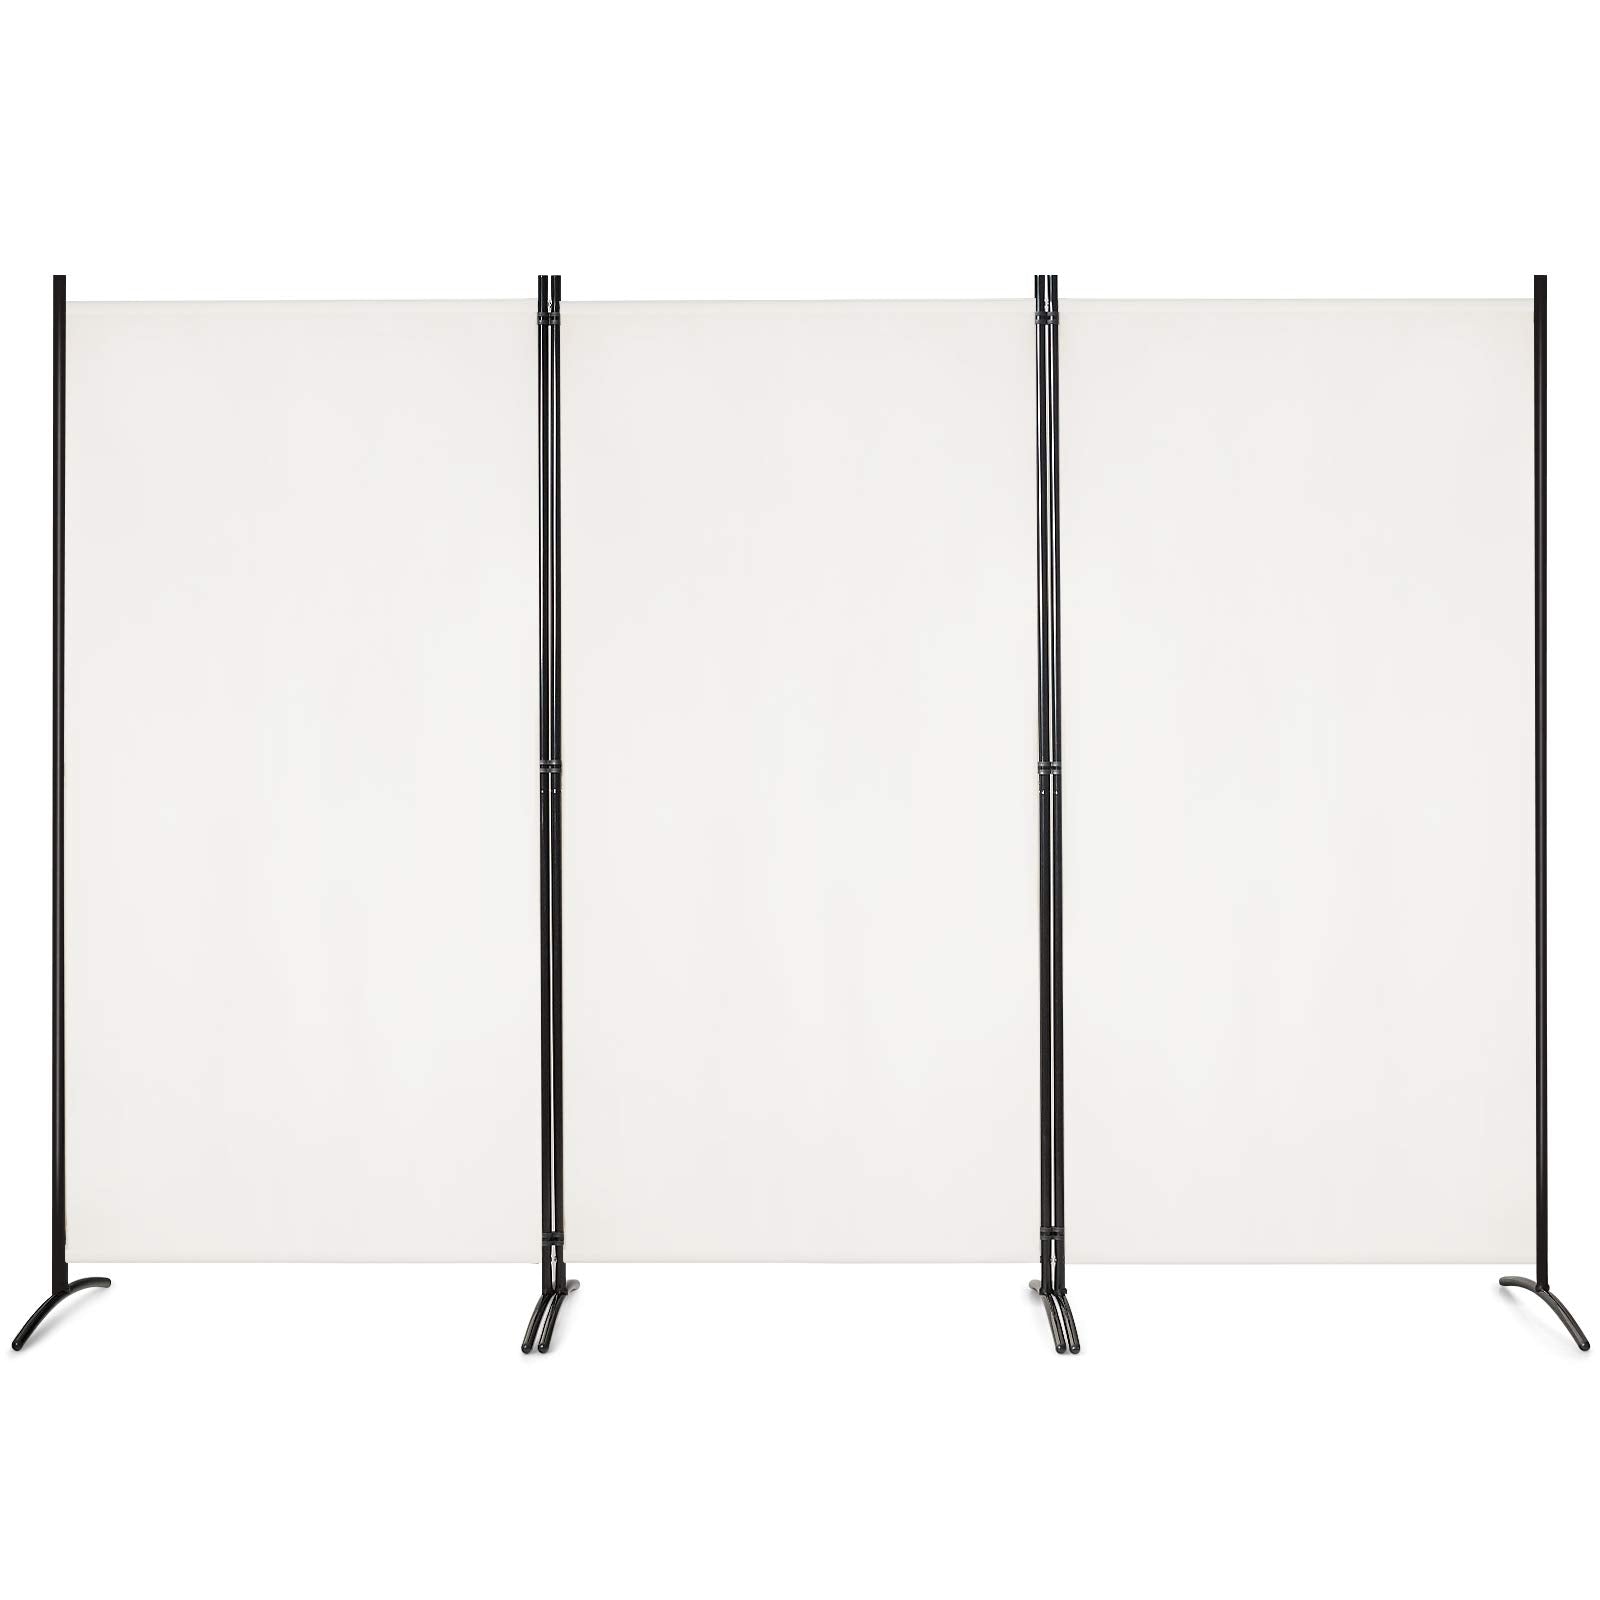 Giantex 6 Ft 3 Panel Room Divider, Folding Portable Privacy Screen w/ Durable Hinges Steel Base